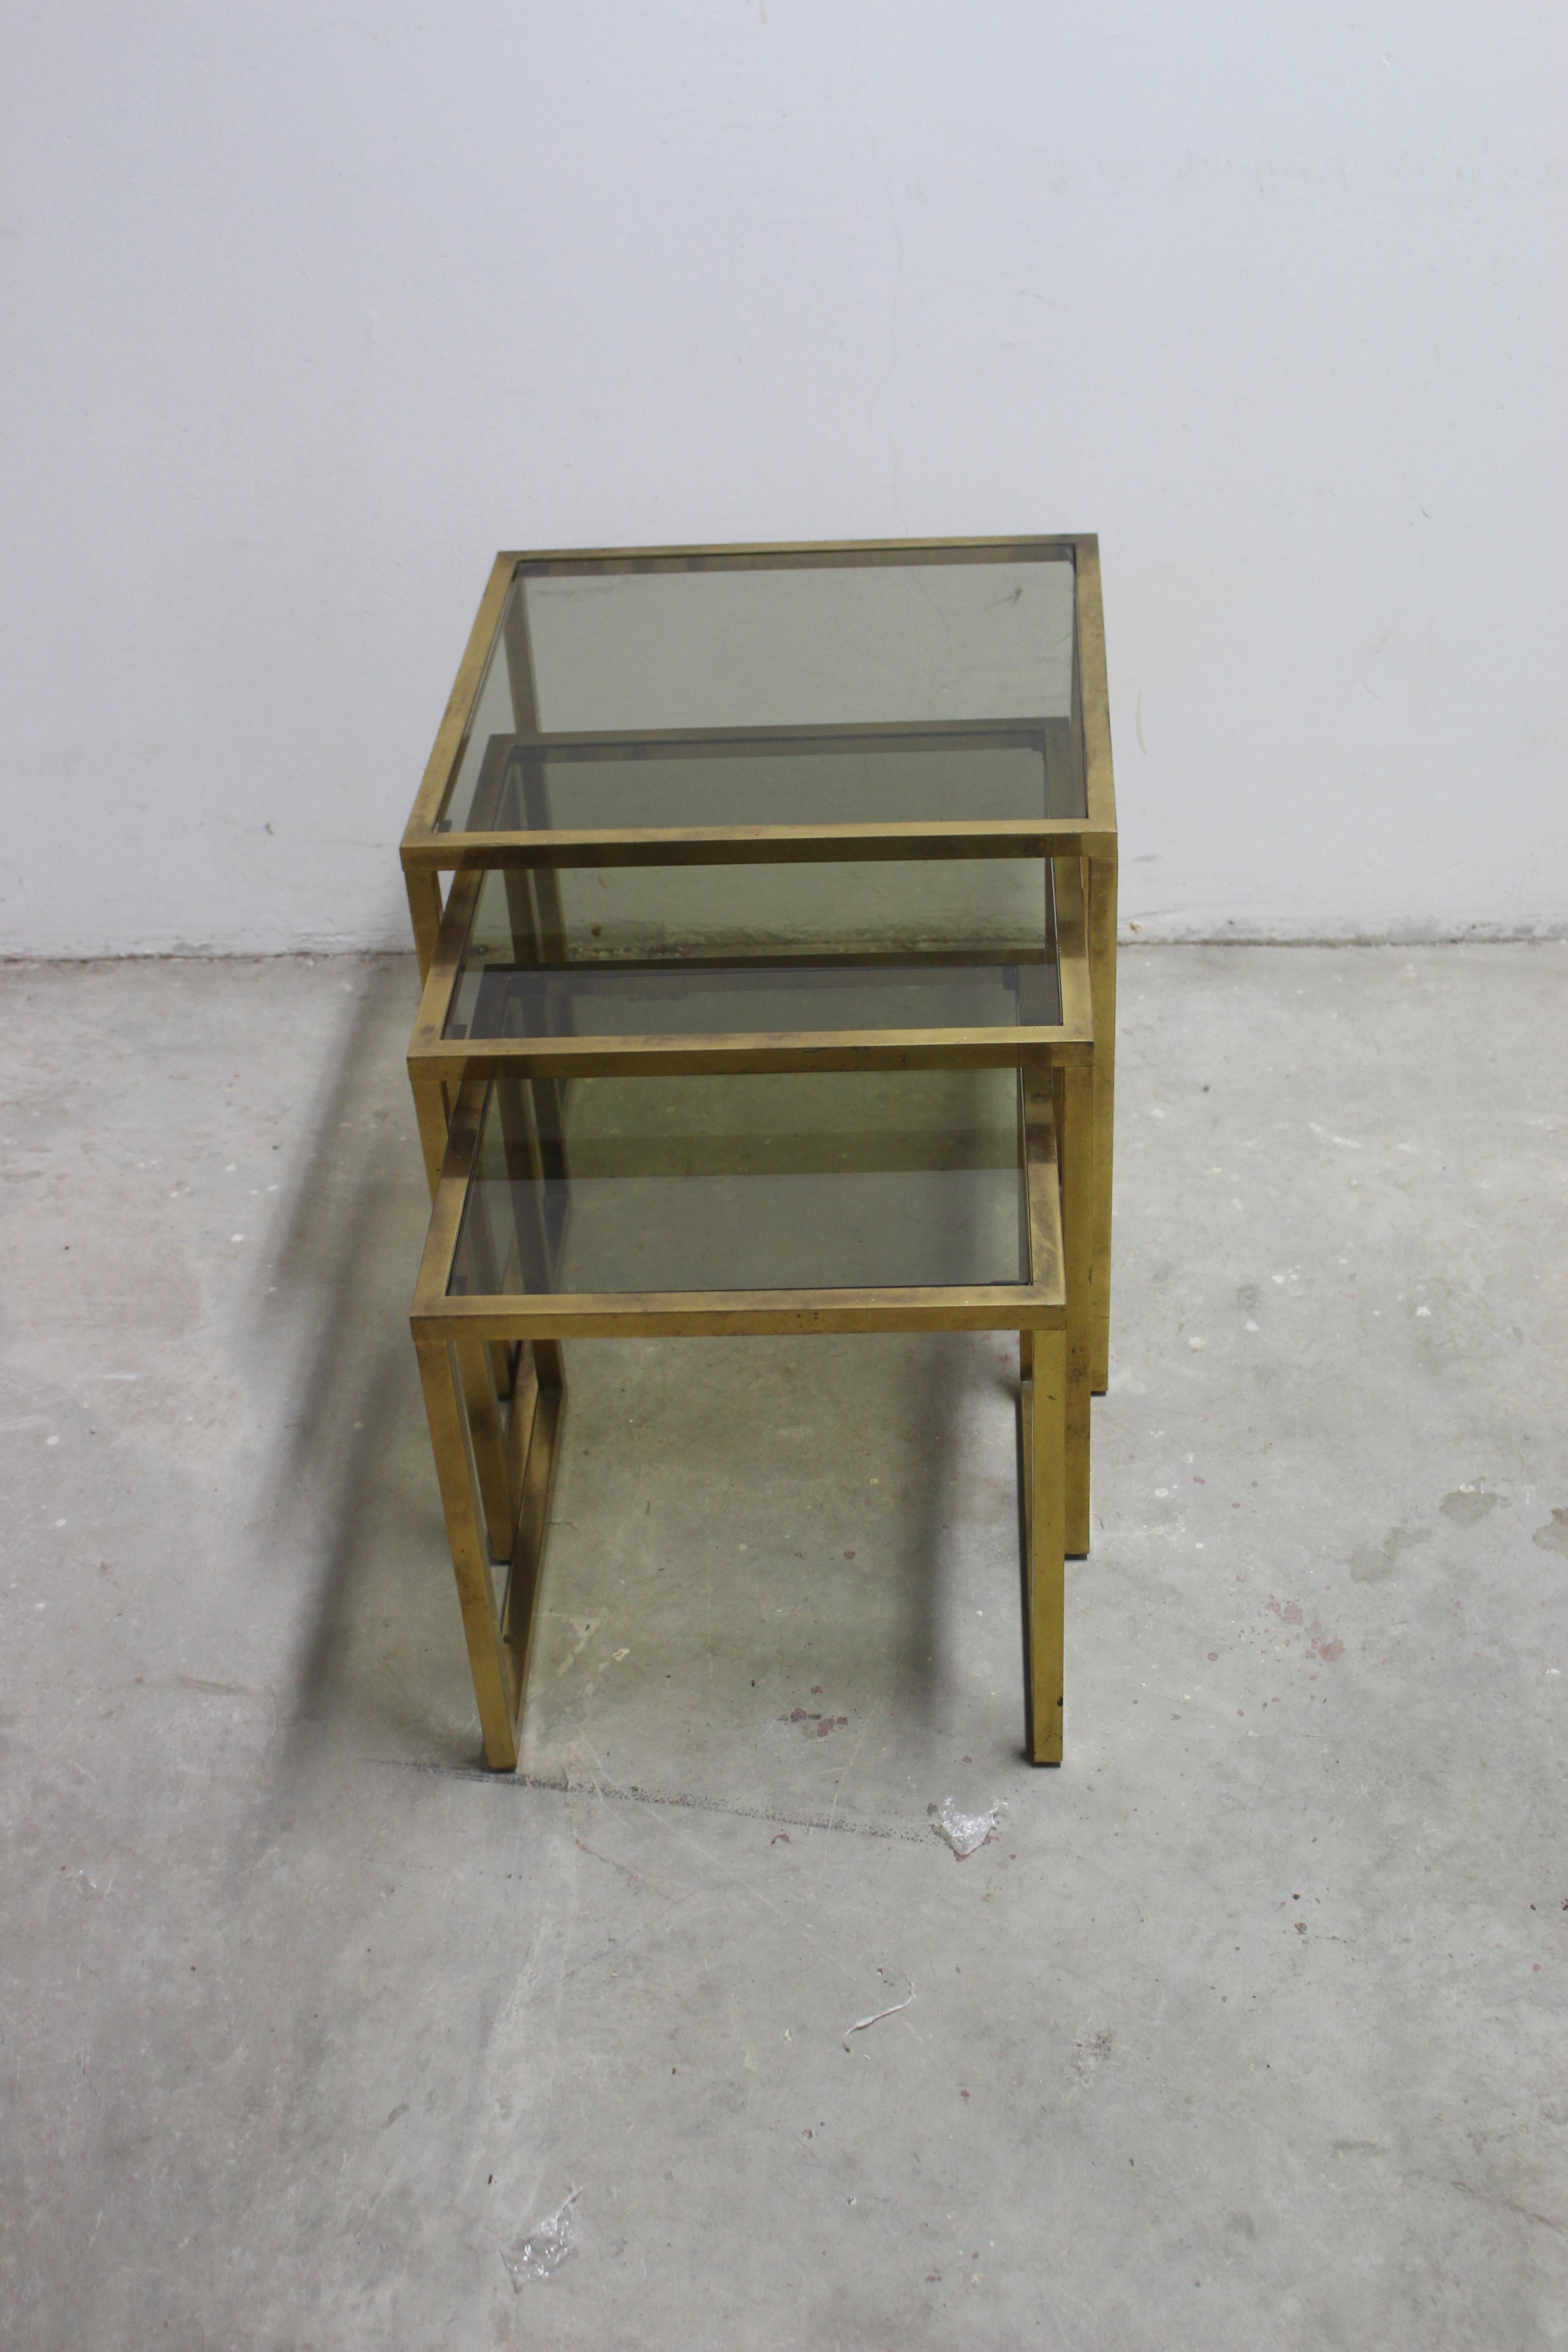 Mid century set of three nesting tables. Antique brass base with the fume glass top. Brass is not polish but shows original condition. We can polished on request.
Medium table dimension is: H: 18, W: 18, D: 18
Small H: 16, W: 16, H: 16.